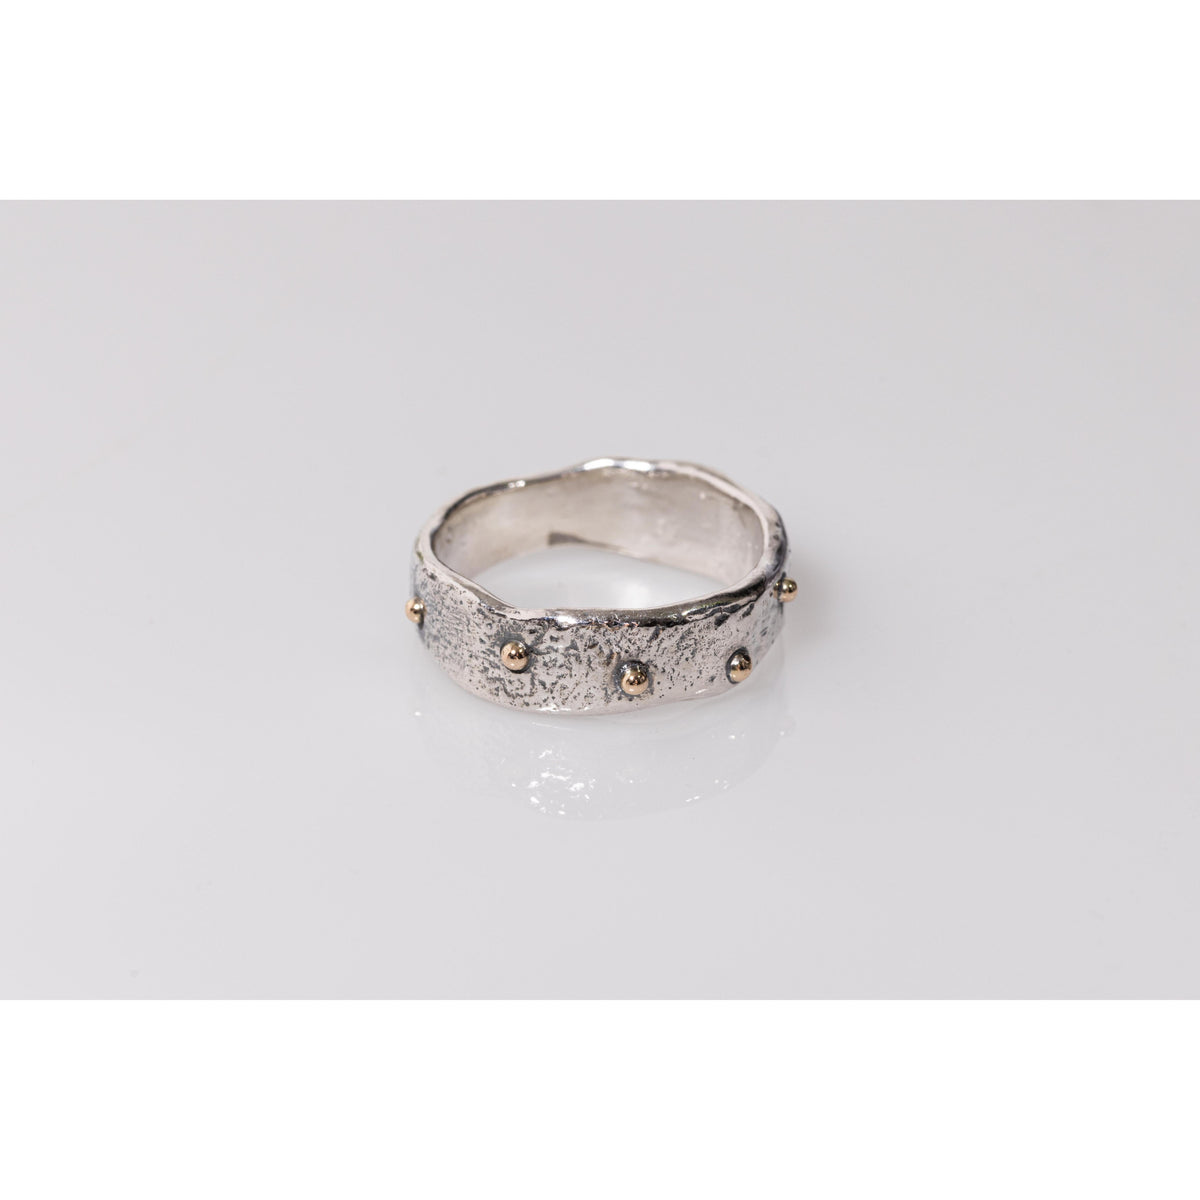 &#39;SA R15 Organic Silver Ring&#39; by Sandra Austin jewellery, available at Padstow Gallery, Cornwall